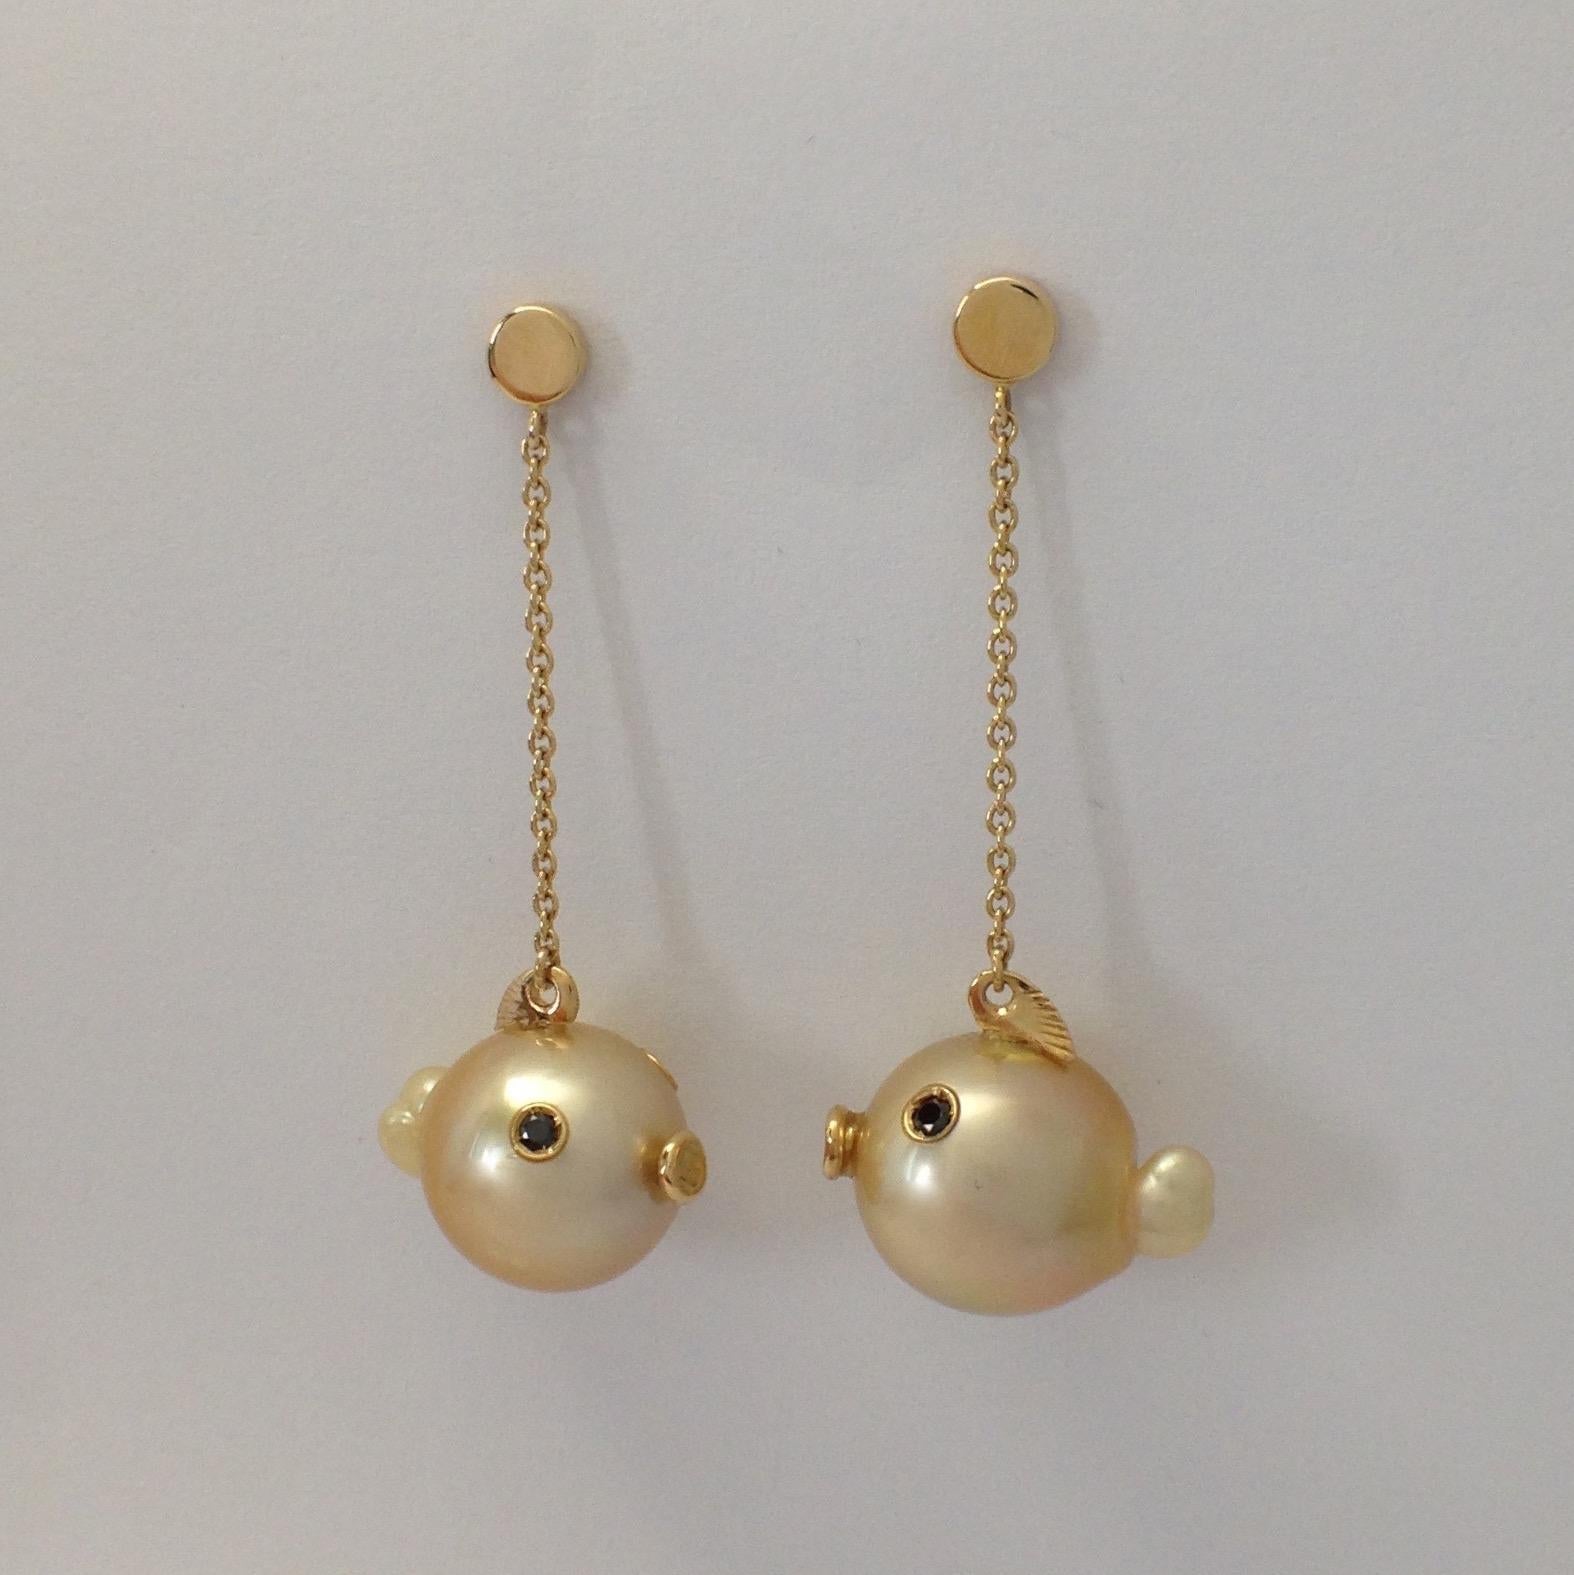 Fish Black Diamond Australian Pearl 18 Kt Gold Drop Dangle Earrings Made in Italy
On these earring there are two gold Australian pearls. 
I put two black diamonds for its eyes, a yellow gold fin.
They are totally handmade.
The diamonds are a total